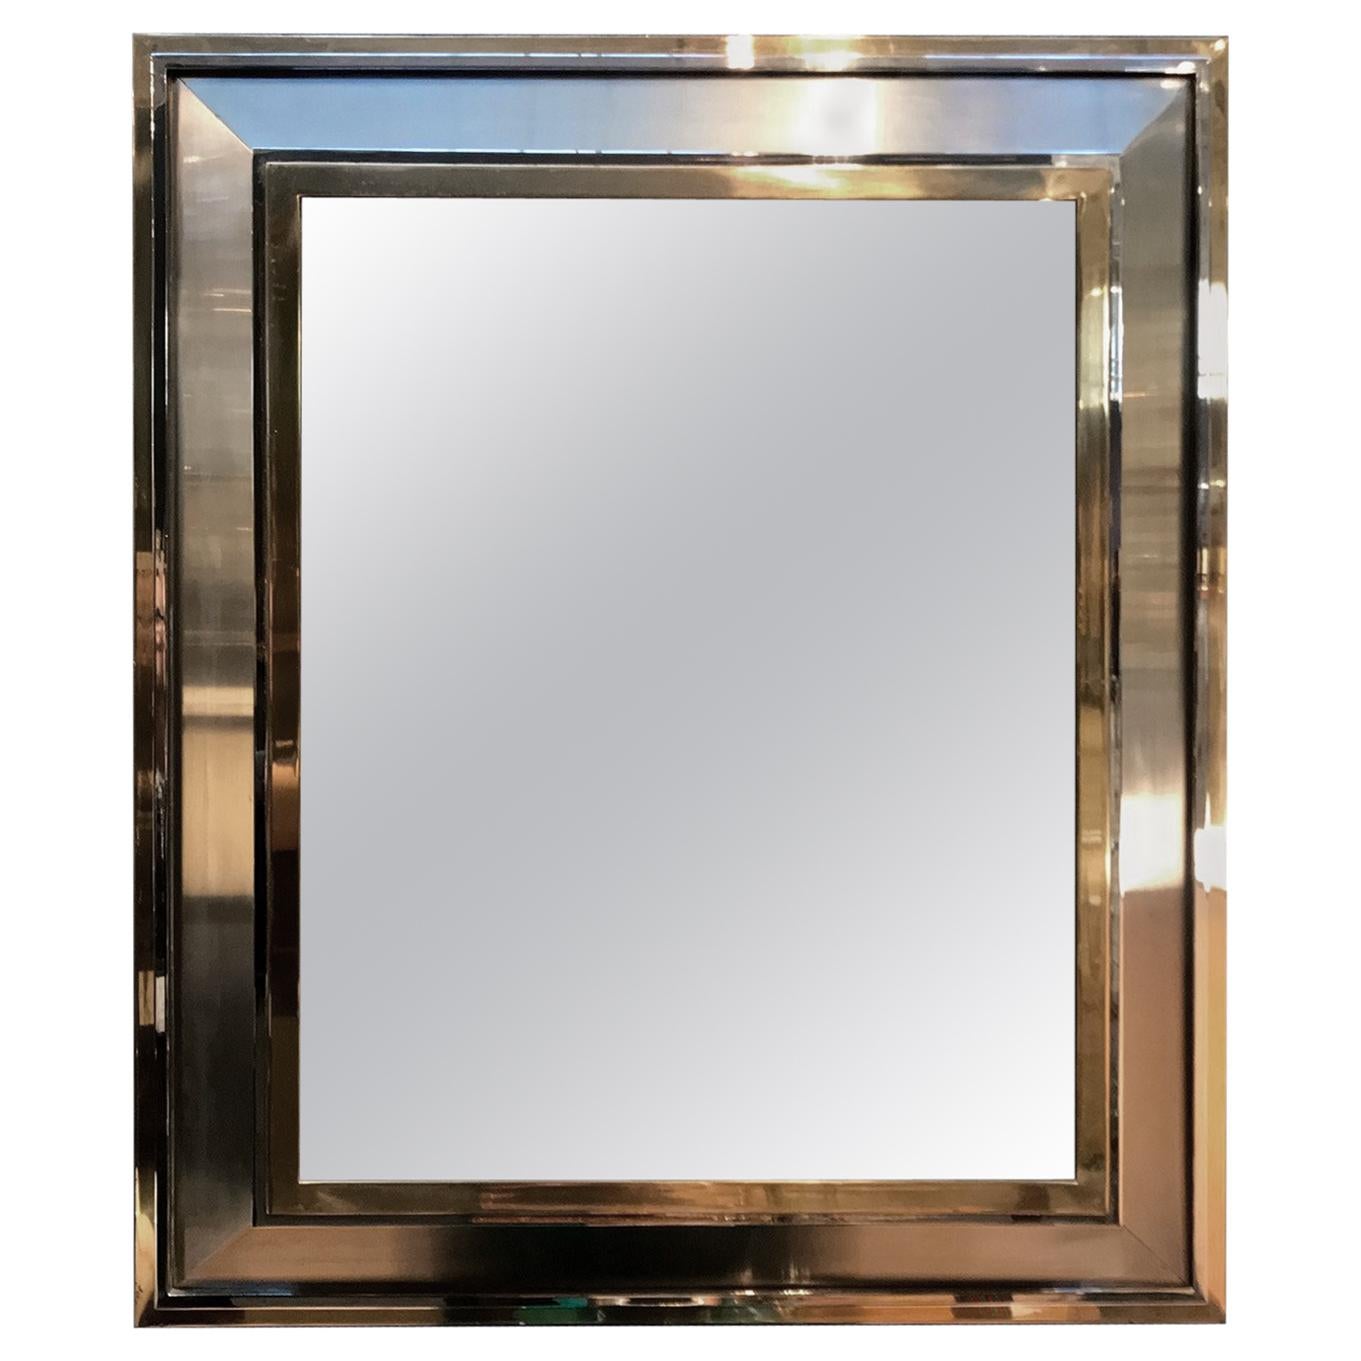 Beautiful Modernist Brass Chrome and Brushed Steal Rectangular Mirror